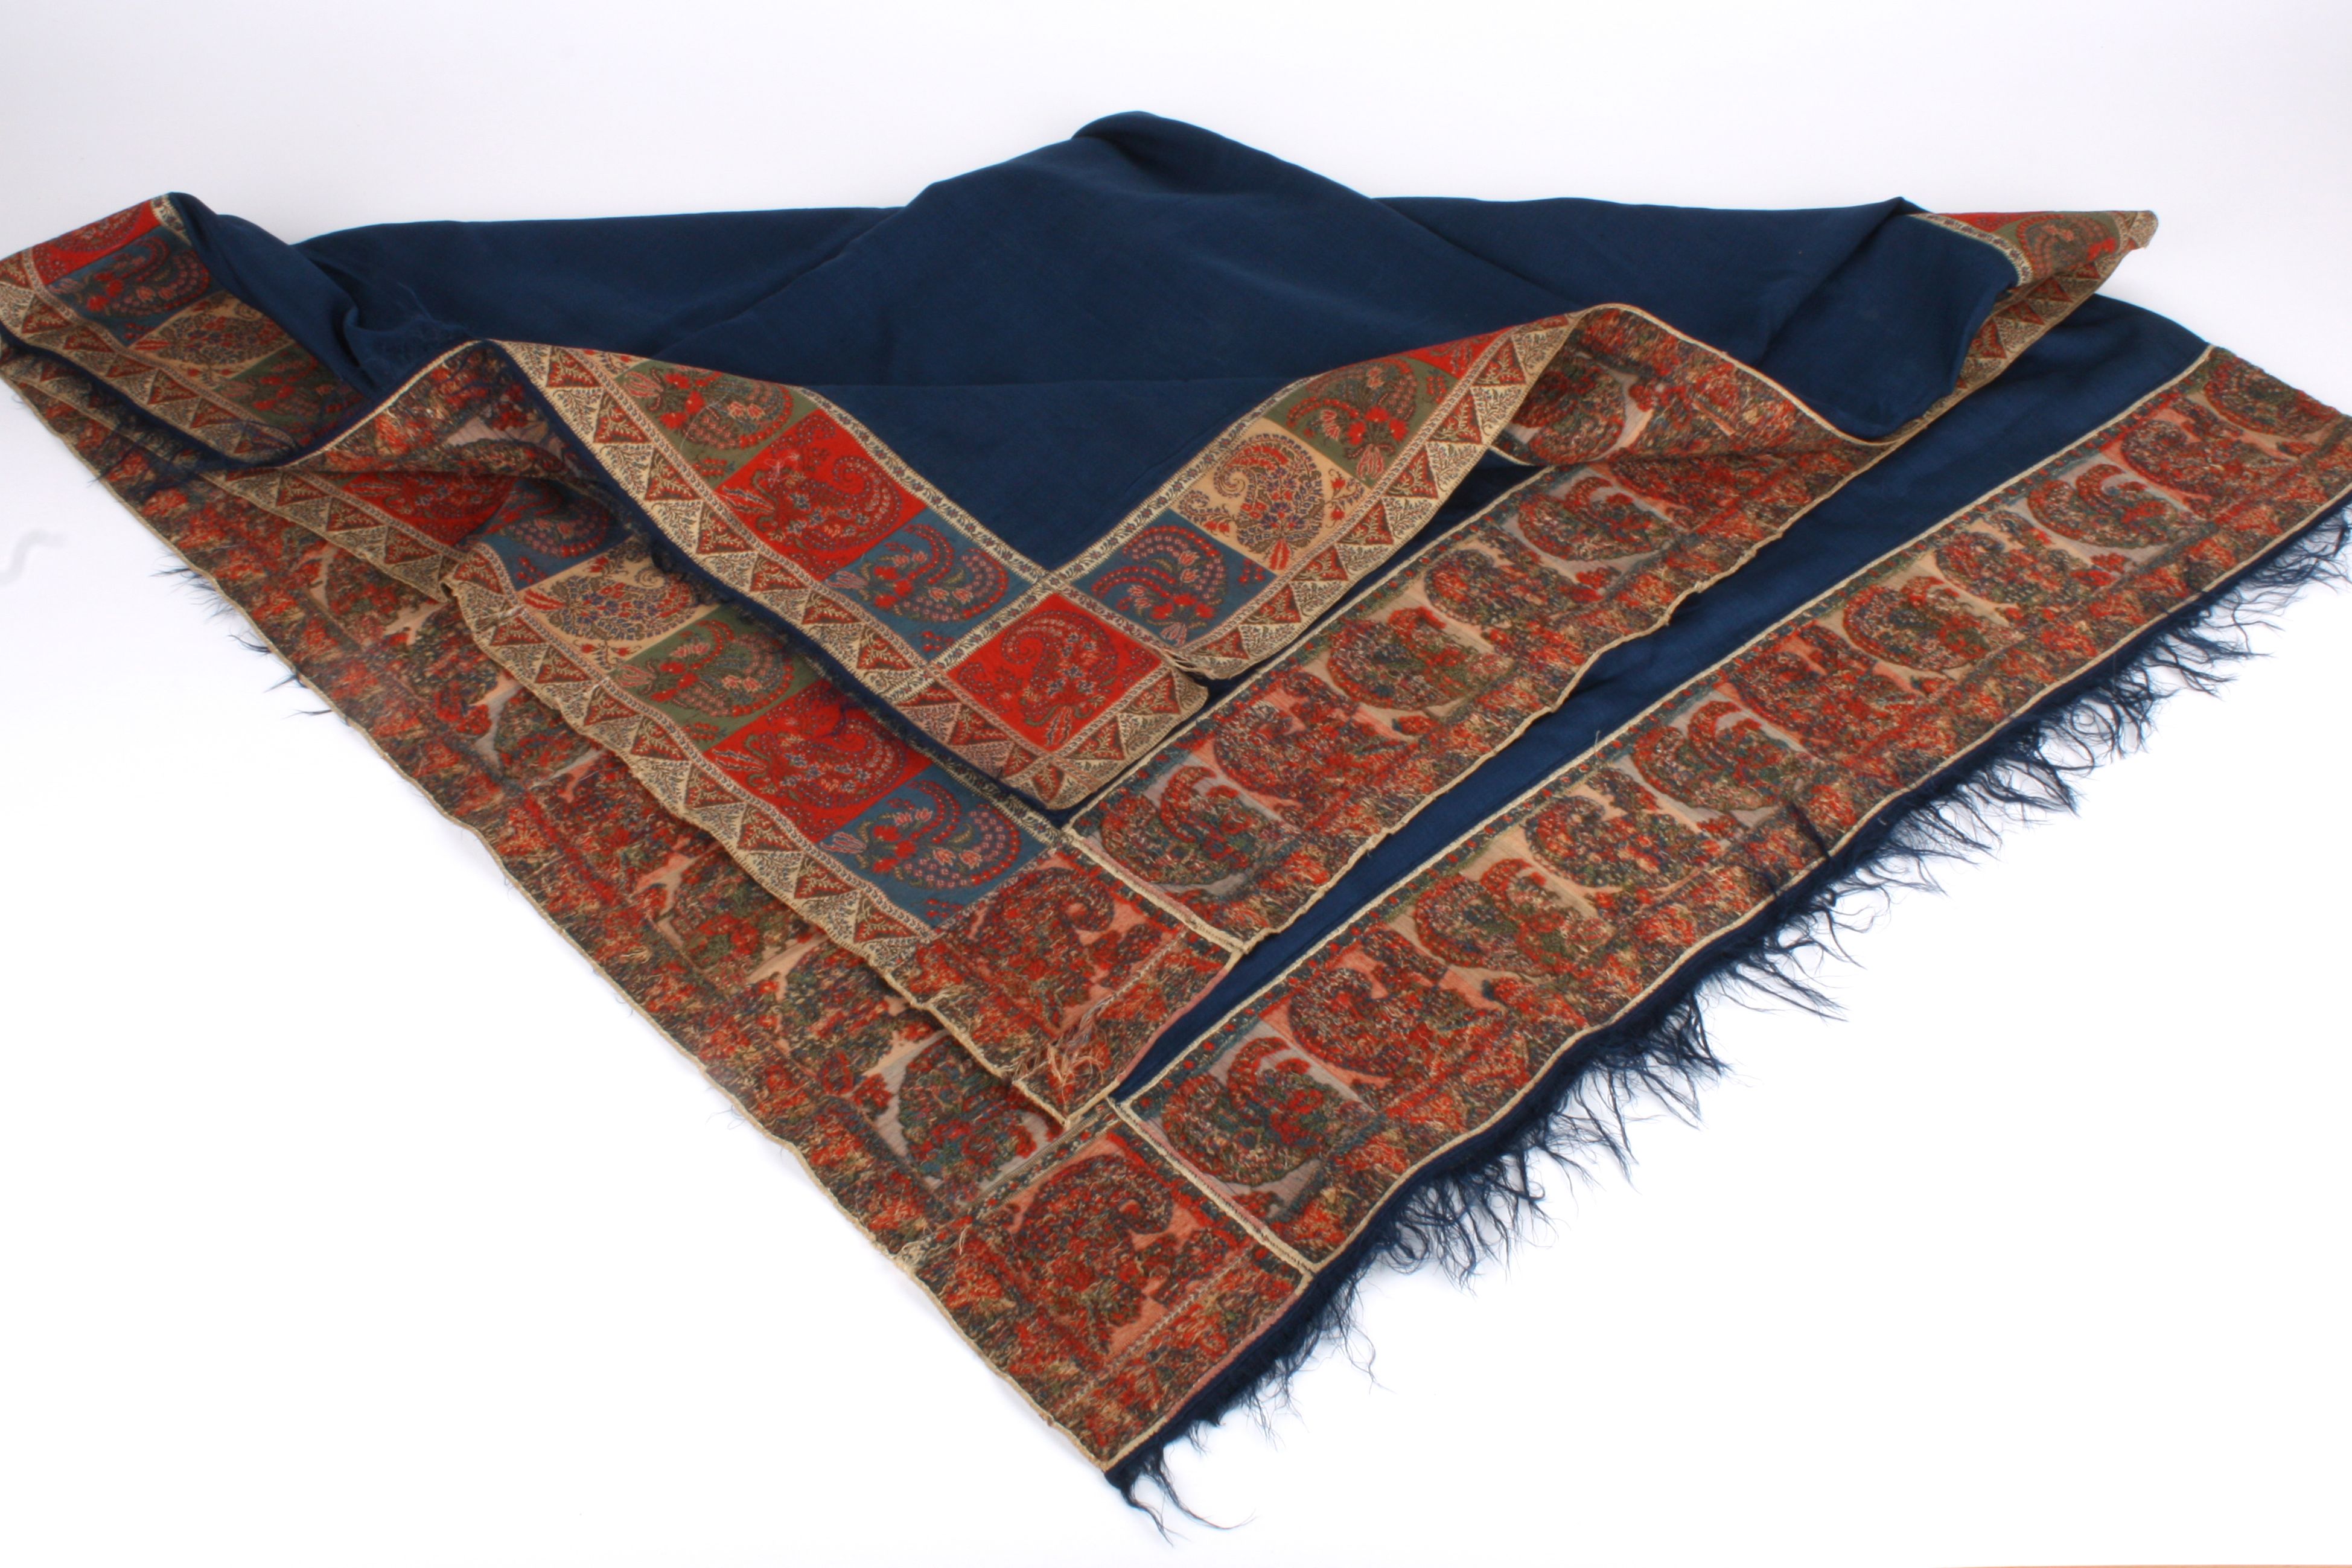 An Early Victorian fine woollen paisley shawl of blue wool with jacquard woven edge trims matching